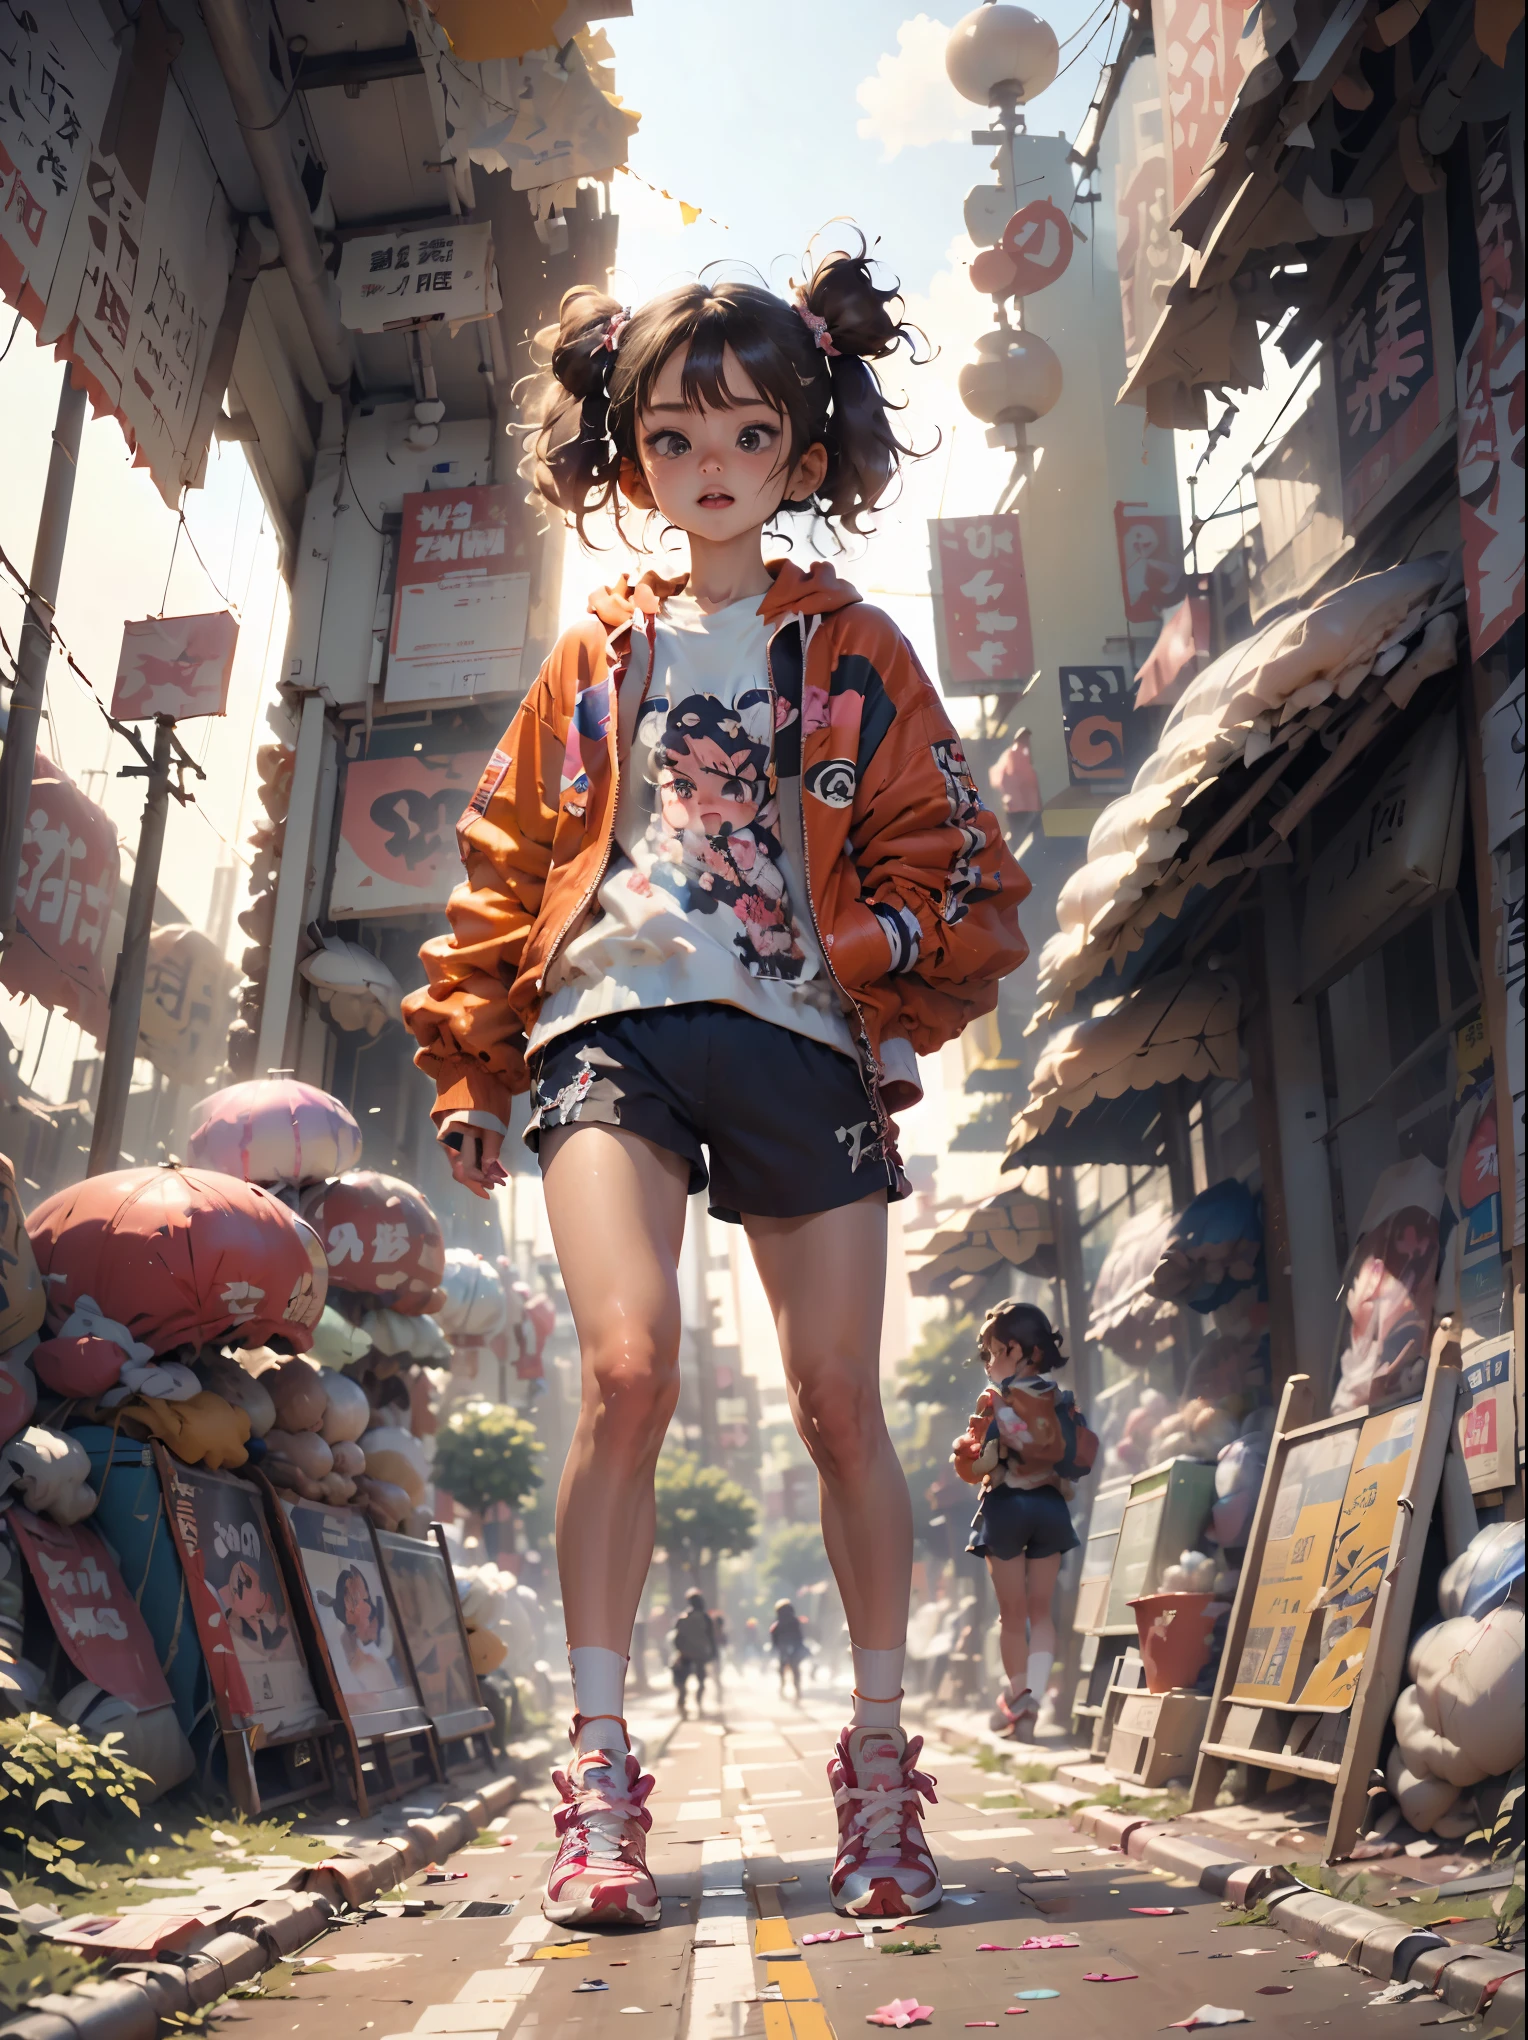 ((Stunning masterpiece anime illustration.)), ((Extremely delicate and beautiful cyber girl.)), ((Very detailed and exposed face)), ((mechanical member, )), (tube connections that join the neck:1.2), ((mass of wires and cables in the body)), ((wearing a colorful Harajuku technical jacket with logo)), (dynamic pose), ((futuristic motorcycle on left side)), ((at night sky with smog)),(Masterpiece), (((Best Quality))), ((ultra detailed)), (Highly detailed photorealistic CG illustration), cinematic lighting, Science fiction, extremely detailed, showy, more detail, (((cyberpunk city background, (Bounty hunter), harajuku district))), NSFW